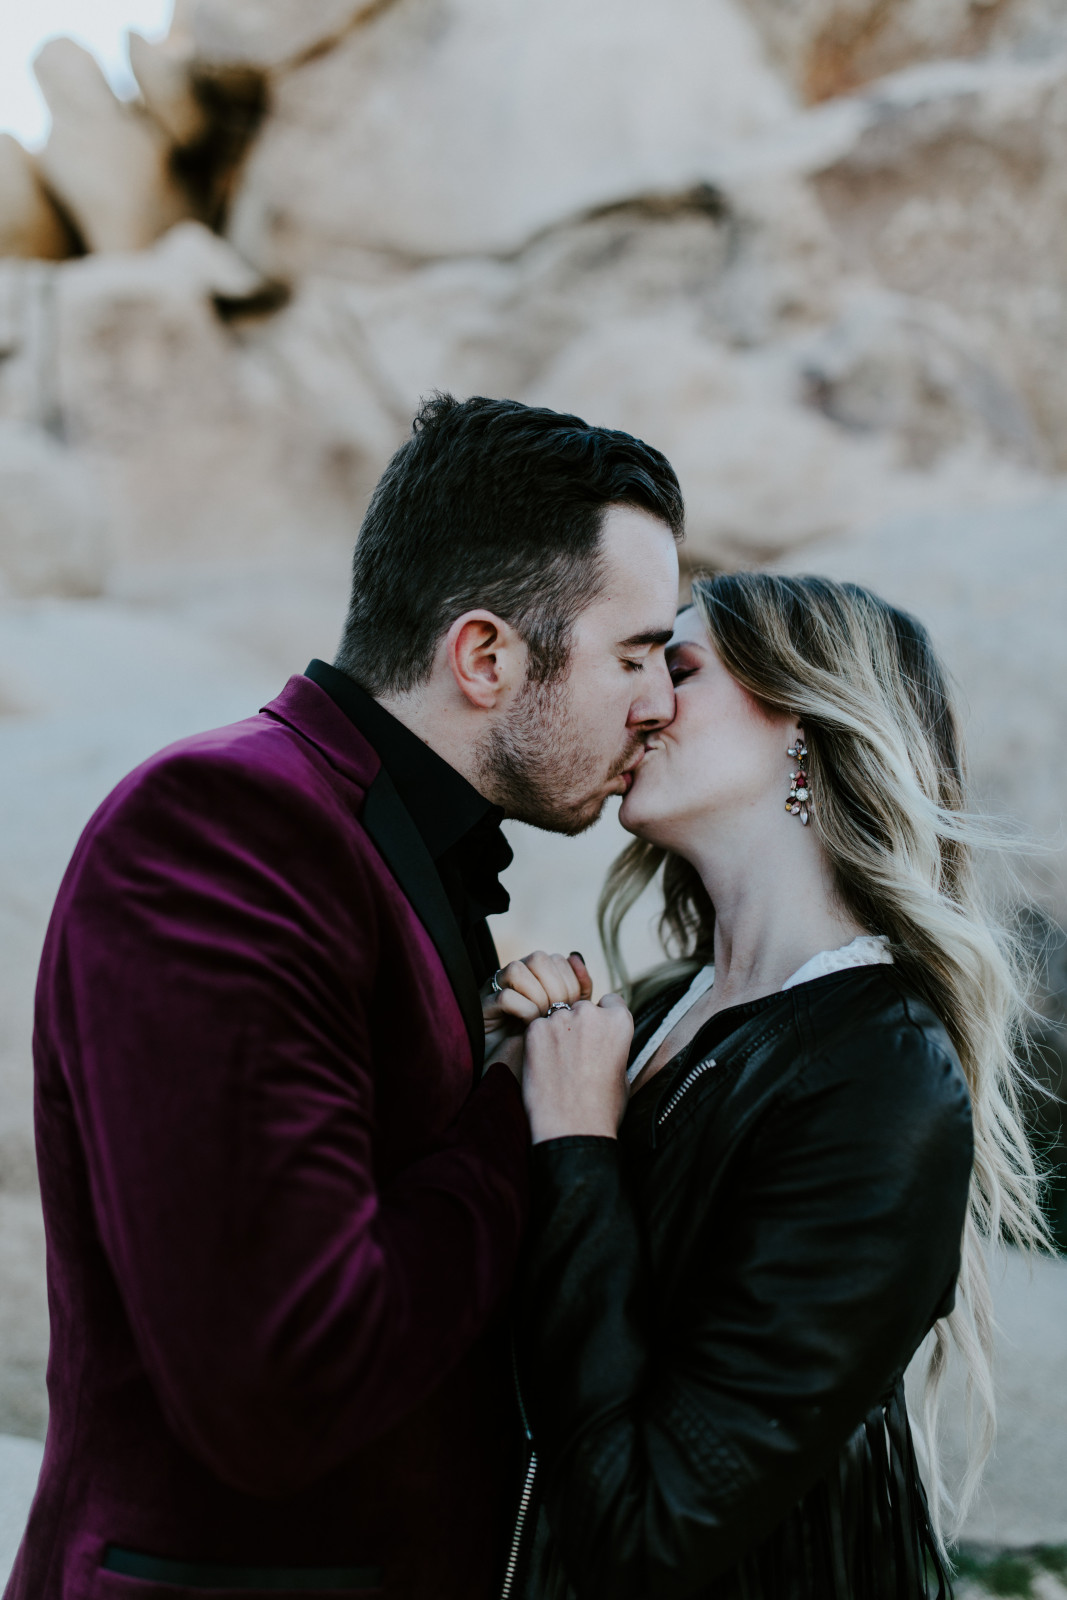 Alyssa and Jeremy go in for a kiss at Joshua Tree National Park, CA Elopement wedding photography at Joshua Tree National Park by Sienna Plus Josh.